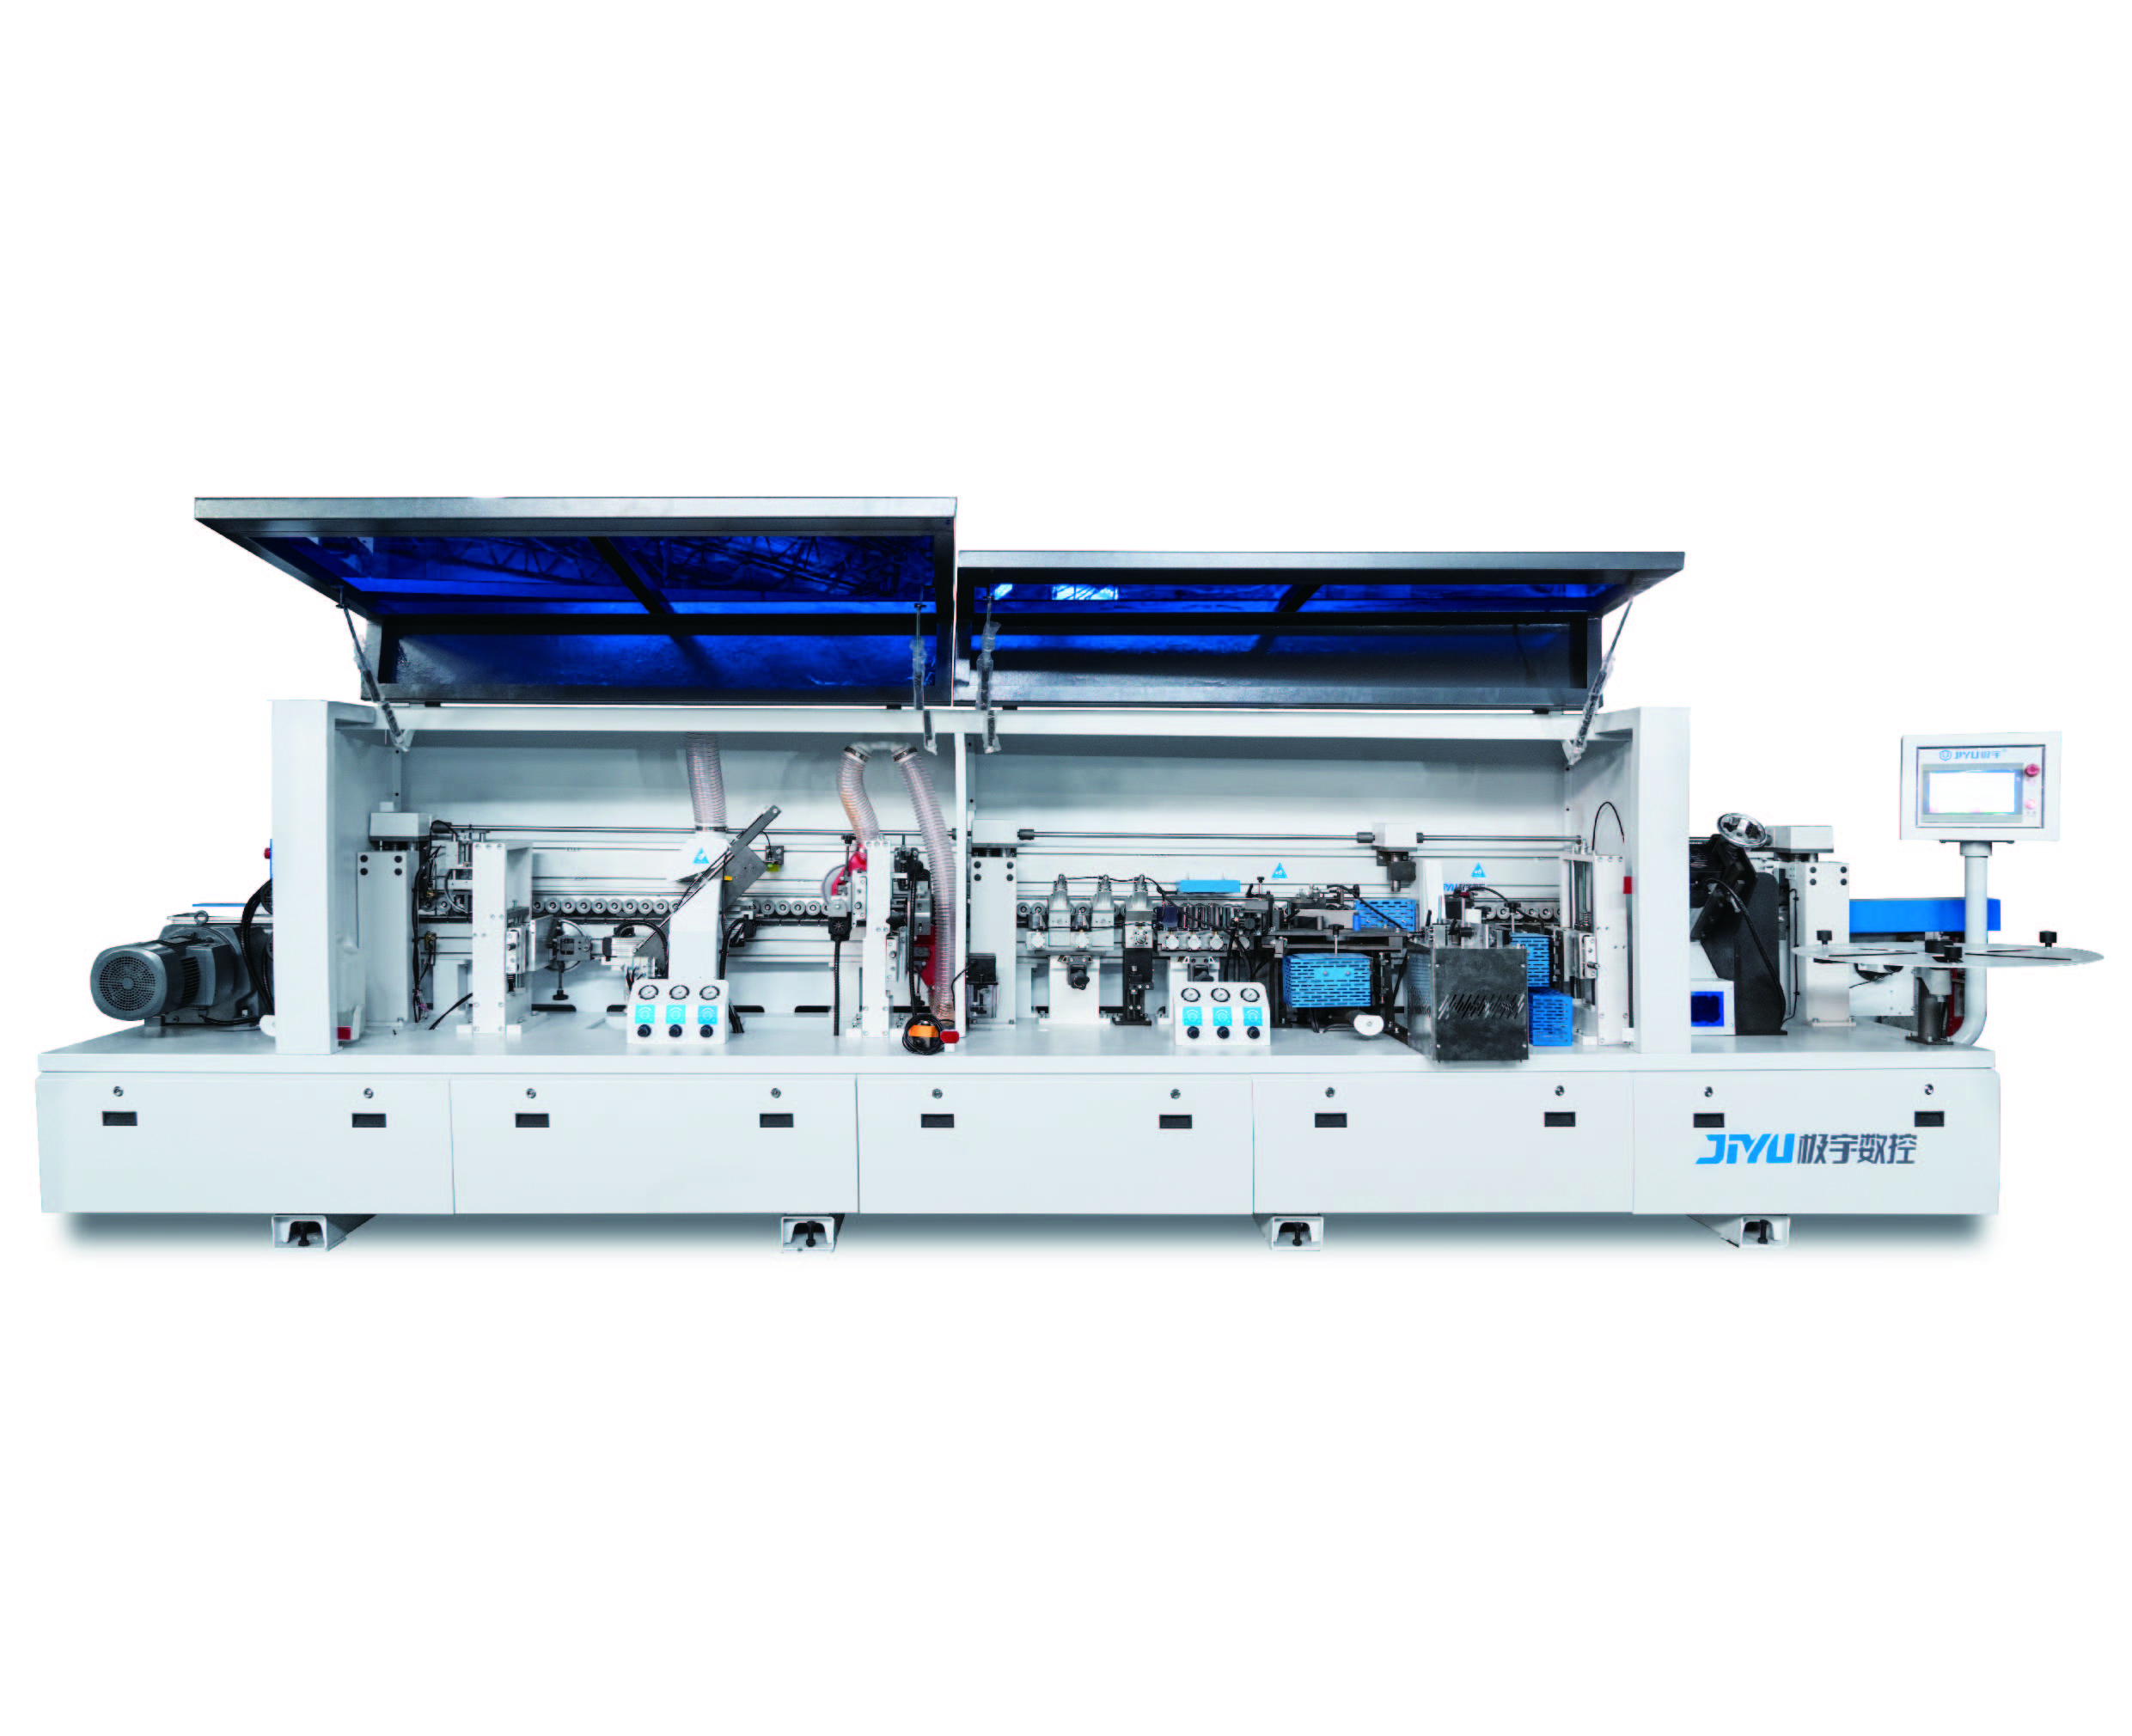 45 Degree Hypotenuse Edge Banding Machine: Creating Smooth, Clean, and Aesthetically Pleasing